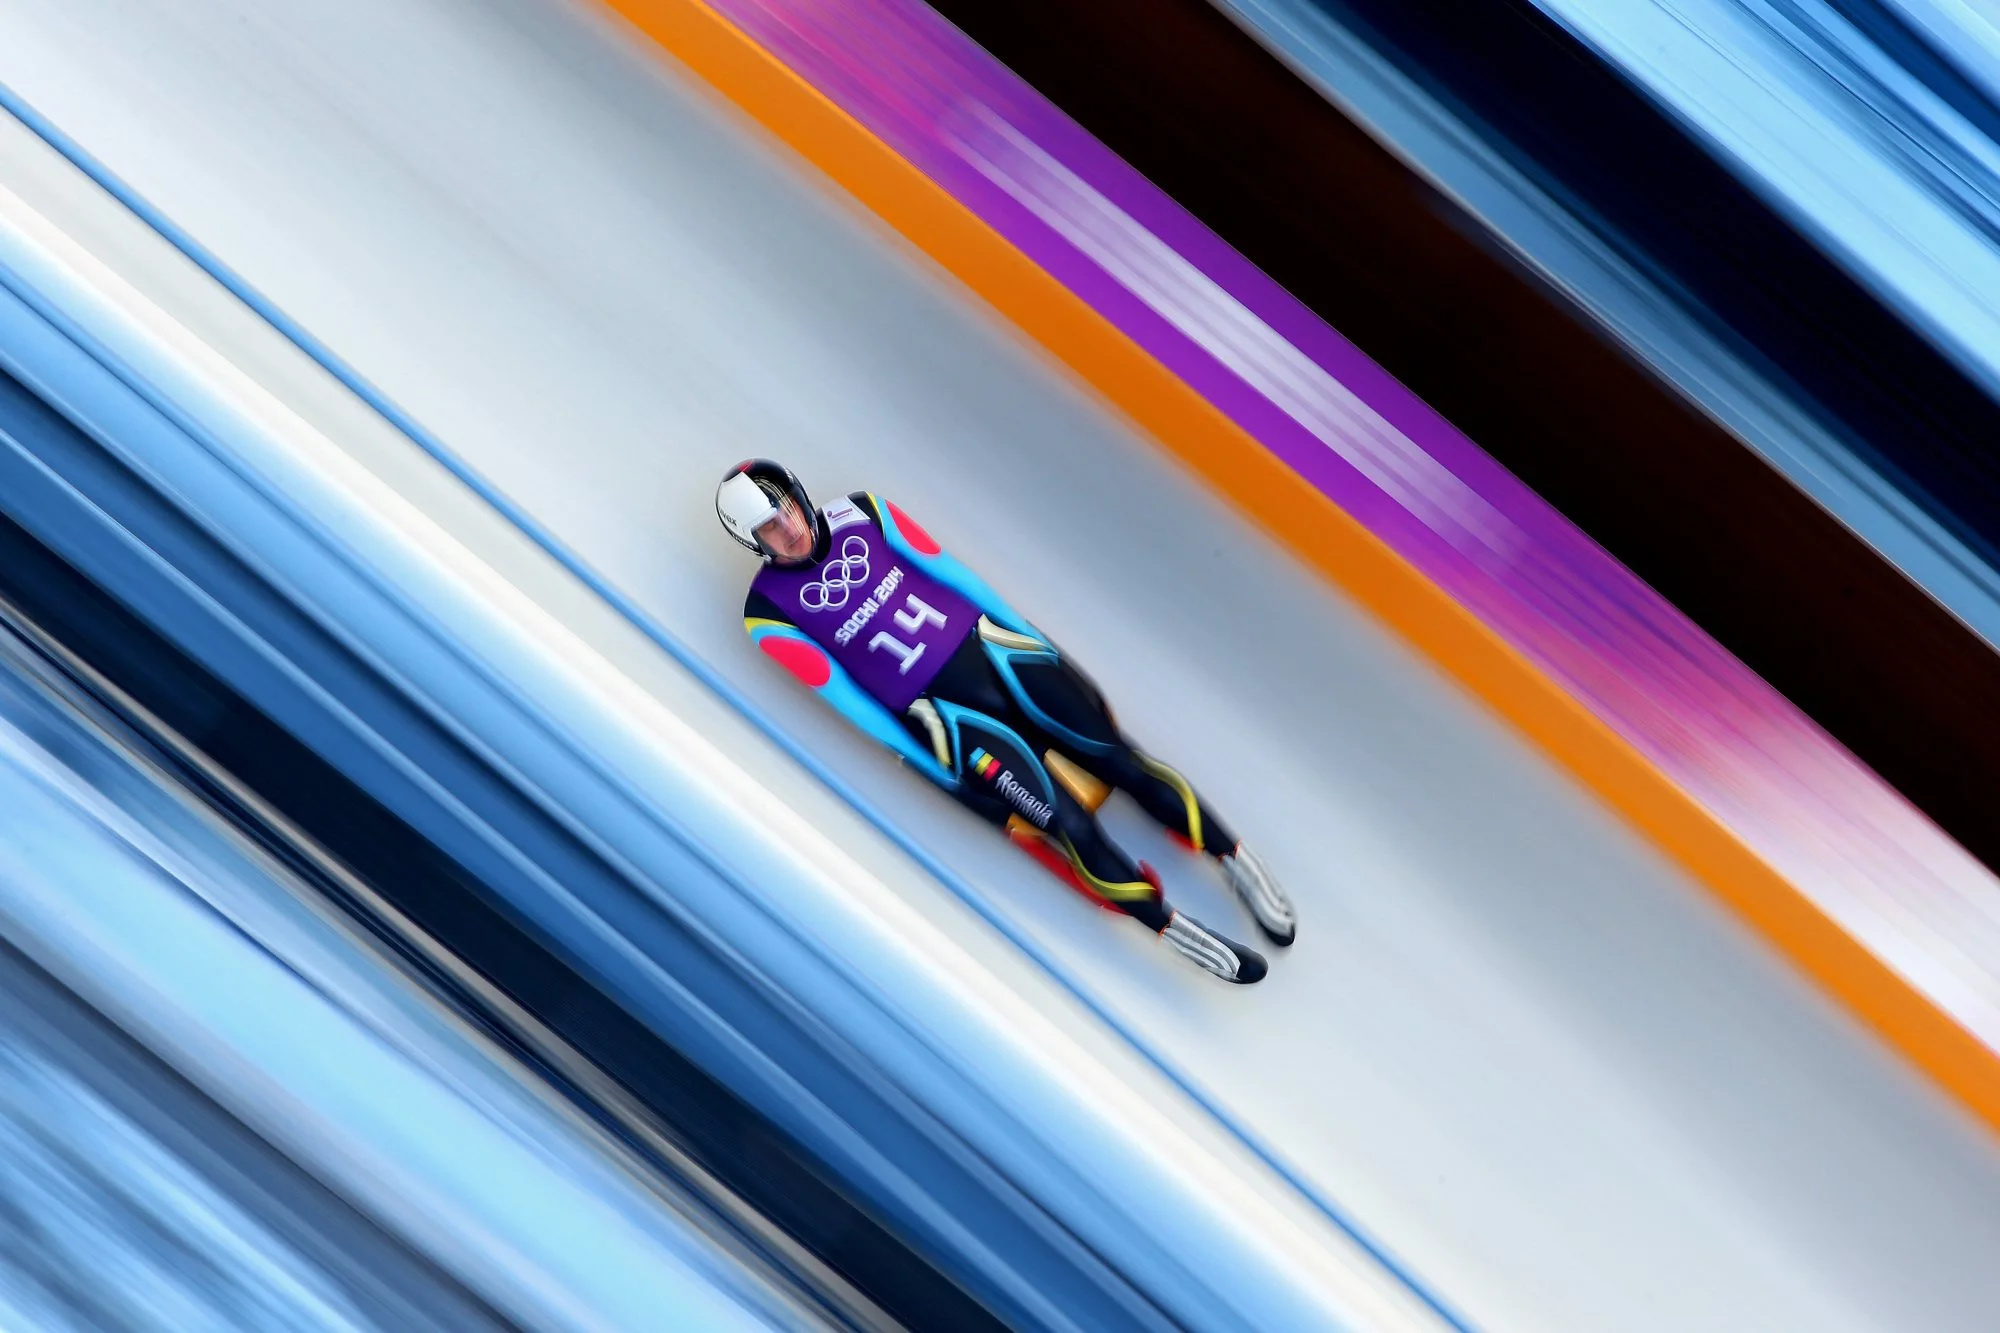 Luge: Sochi 2014 Winter Olympics men's singles event, A competitive winter sport. 2000x1340 HD Background.